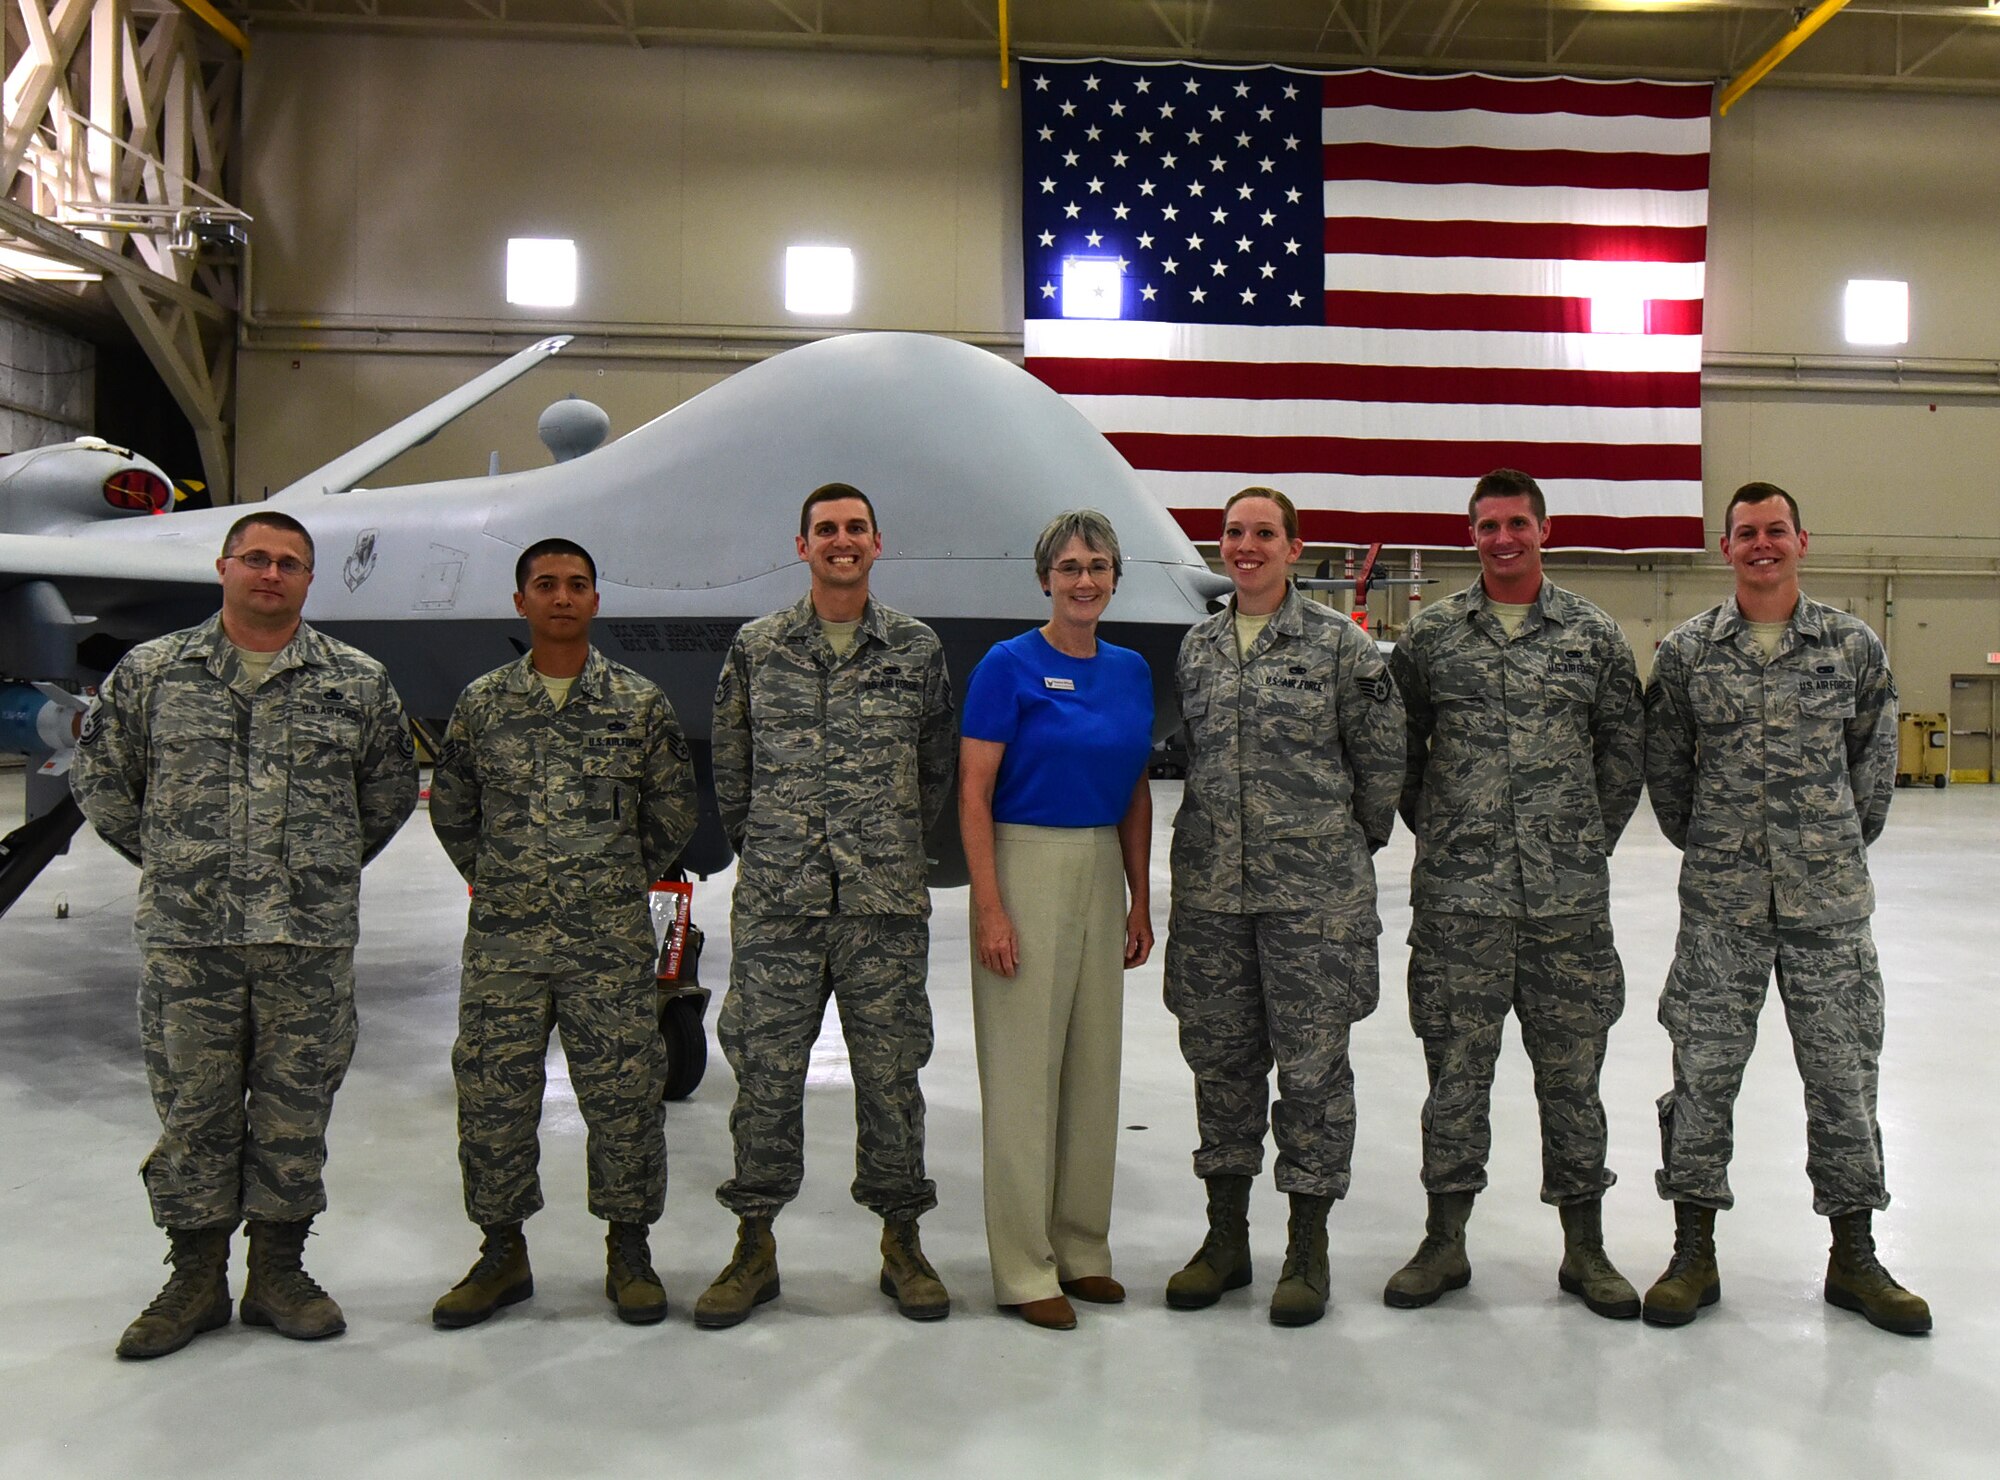 Secretary of the Air Force Heather Wilson shares a photo with members of the 432nd Aircraft Maintenance Squadron, July 19, 2017, at Creech Air Force Base, Nev. The AMXS maintainers briefed the SecAF on the MQ-1 Predator and MQ-9 Reaper specifics. (U.S. Air Force photo/Senior Airman Christian Clausen)